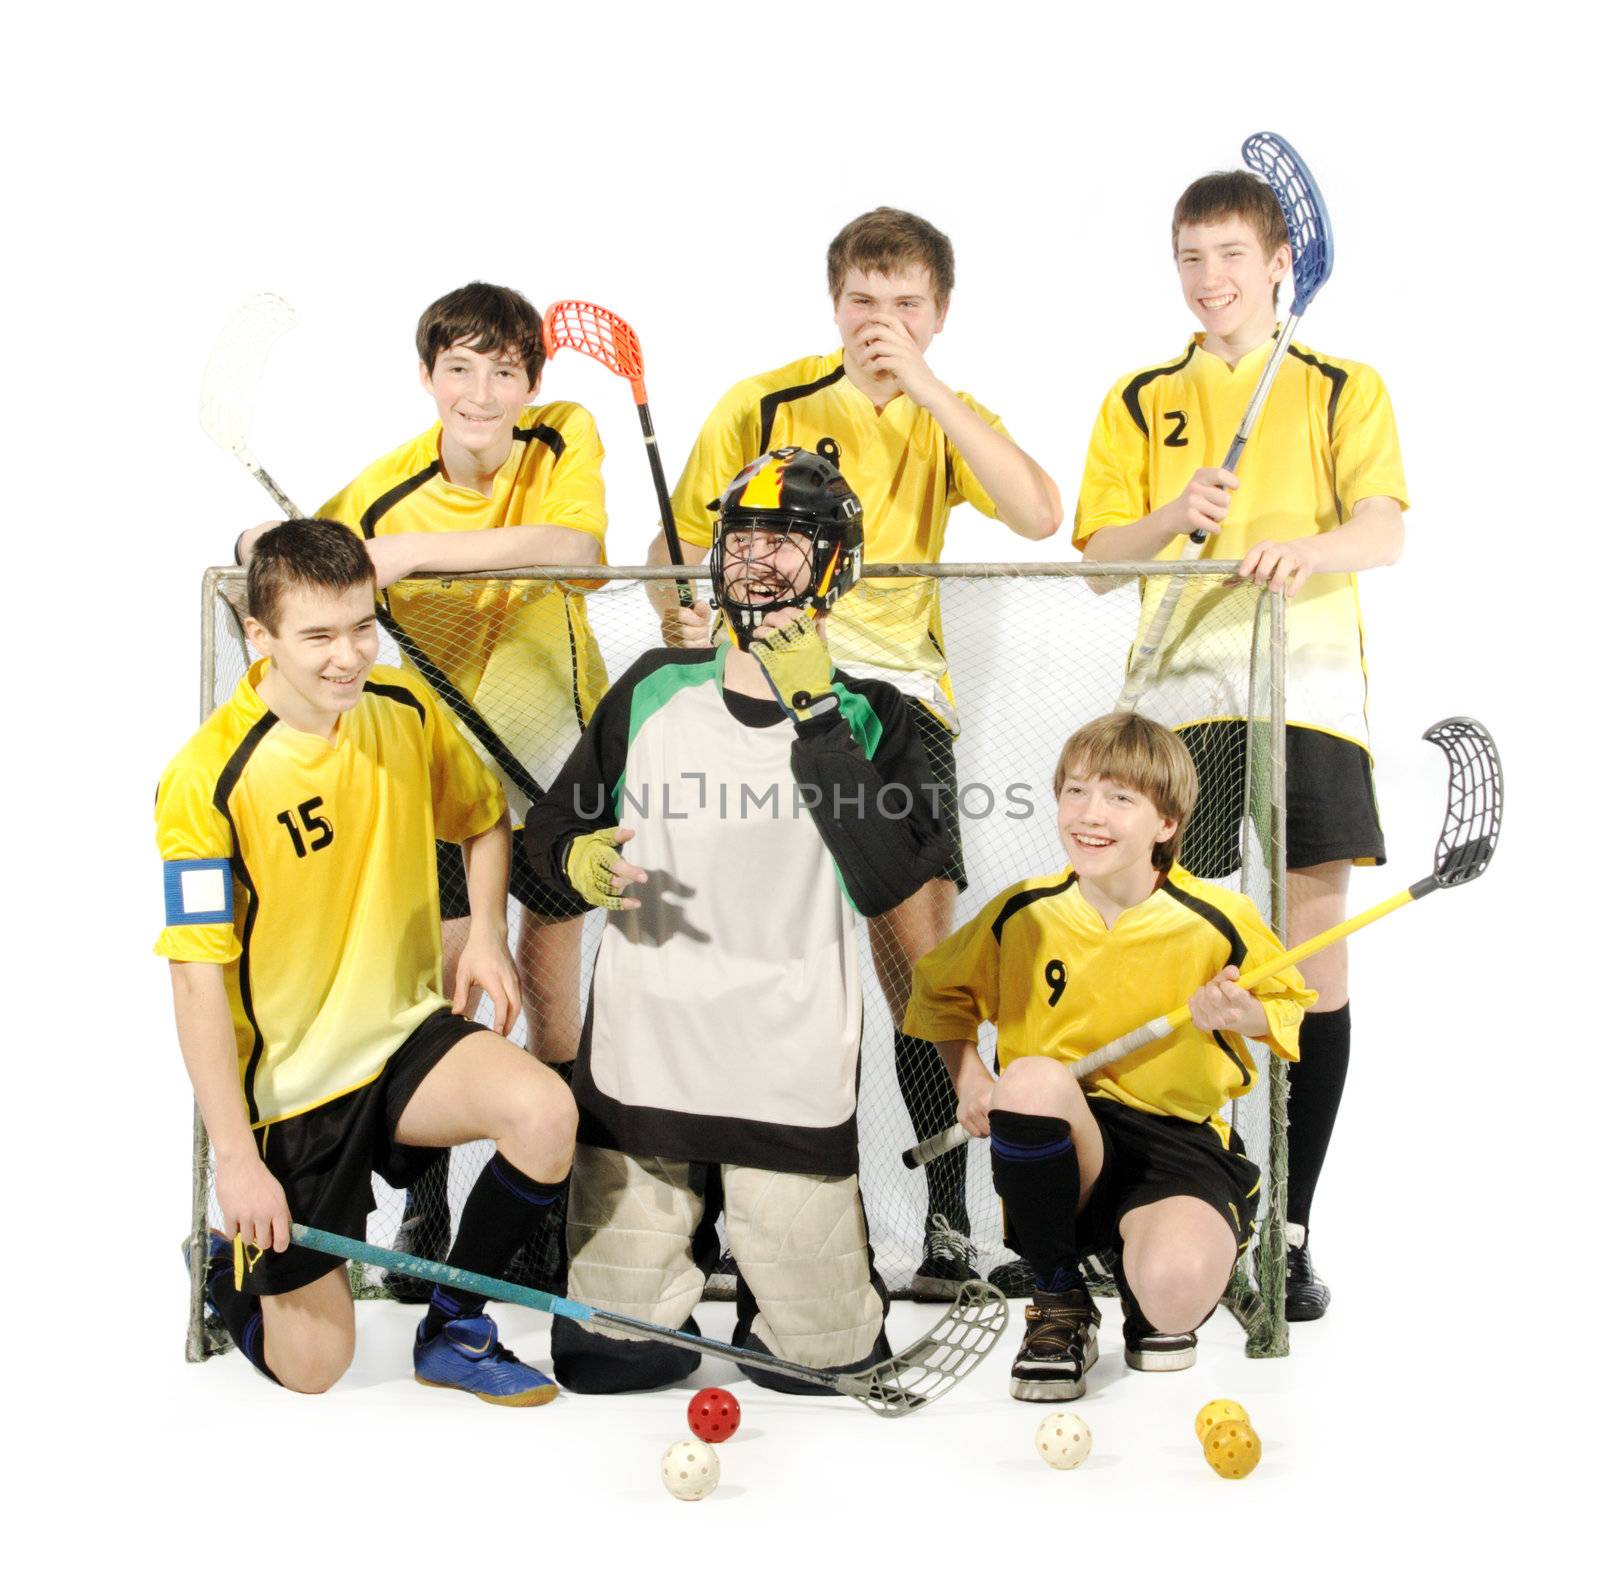 floorball players and goalkeeper on the white background
